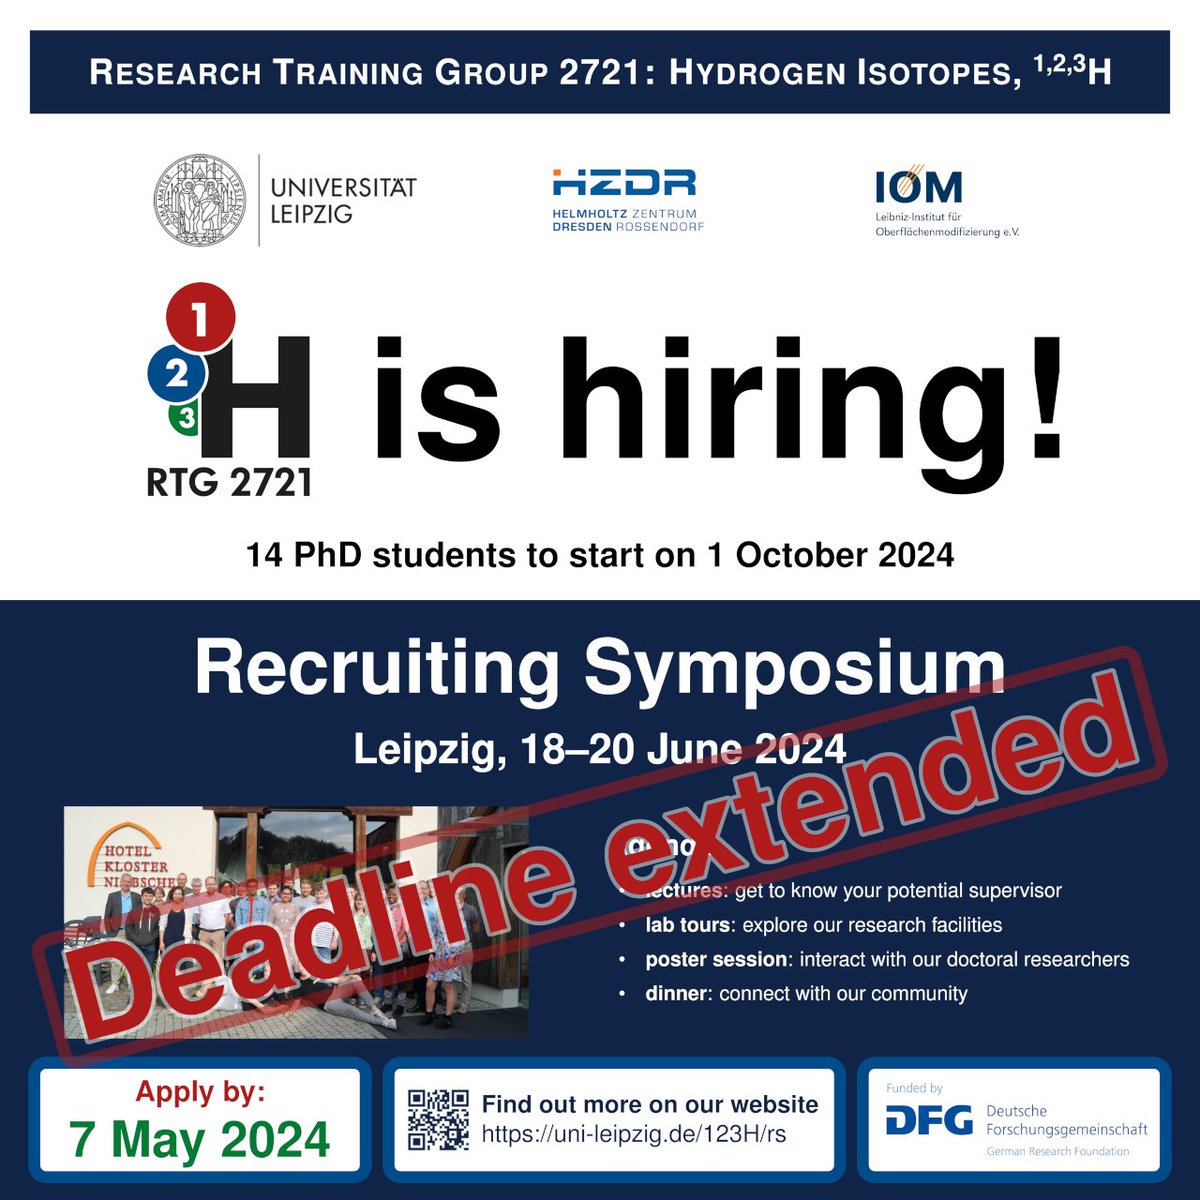 📢 Deadline extended:

Apply now for participation in the ¹²³H Recruiting Symposium and learn about our

14 #openpositions for a #structured #PhD in #chemistry / #physics

Find out more on our website:
uni-leipzig.de/123h/rs

#research #jobs #PhDPrograms #materialsscience